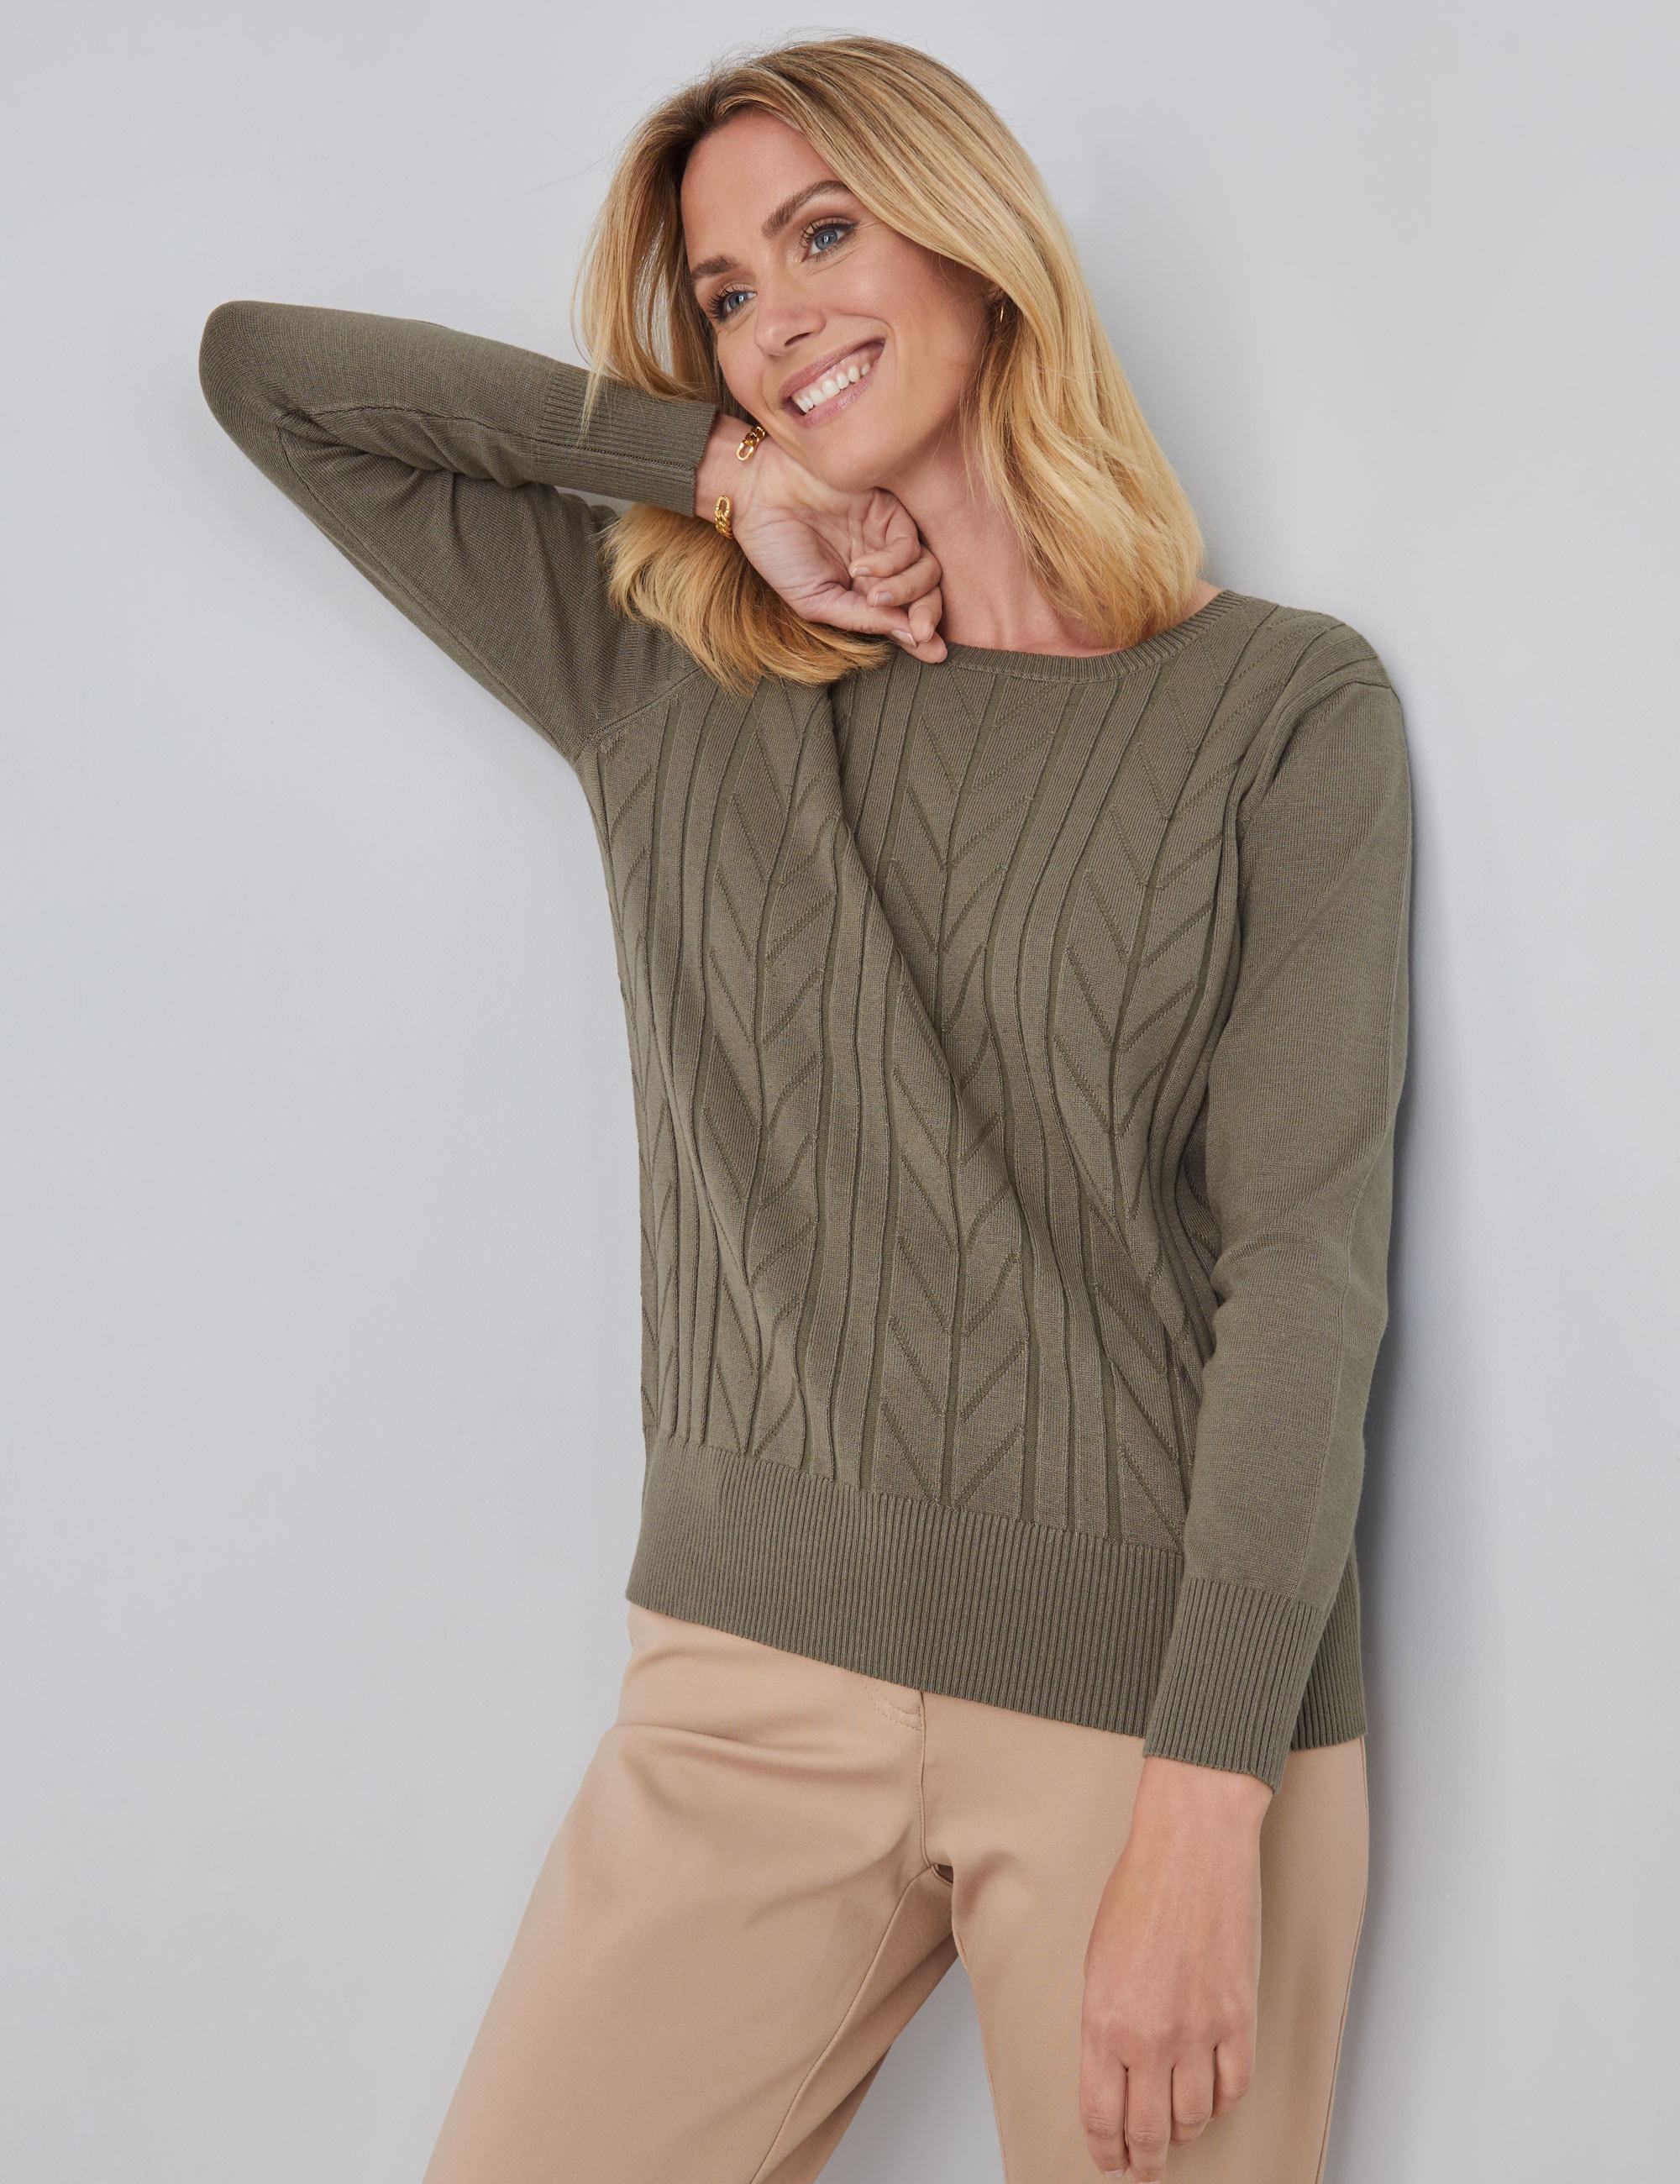 NONI B - Womens Jumper - Regular Winter Sweater - Green Pullover Cable Knit - Knitwear - Long Sleeve - Dusty Olive - Crew Neck - Chevron - Casual Wear